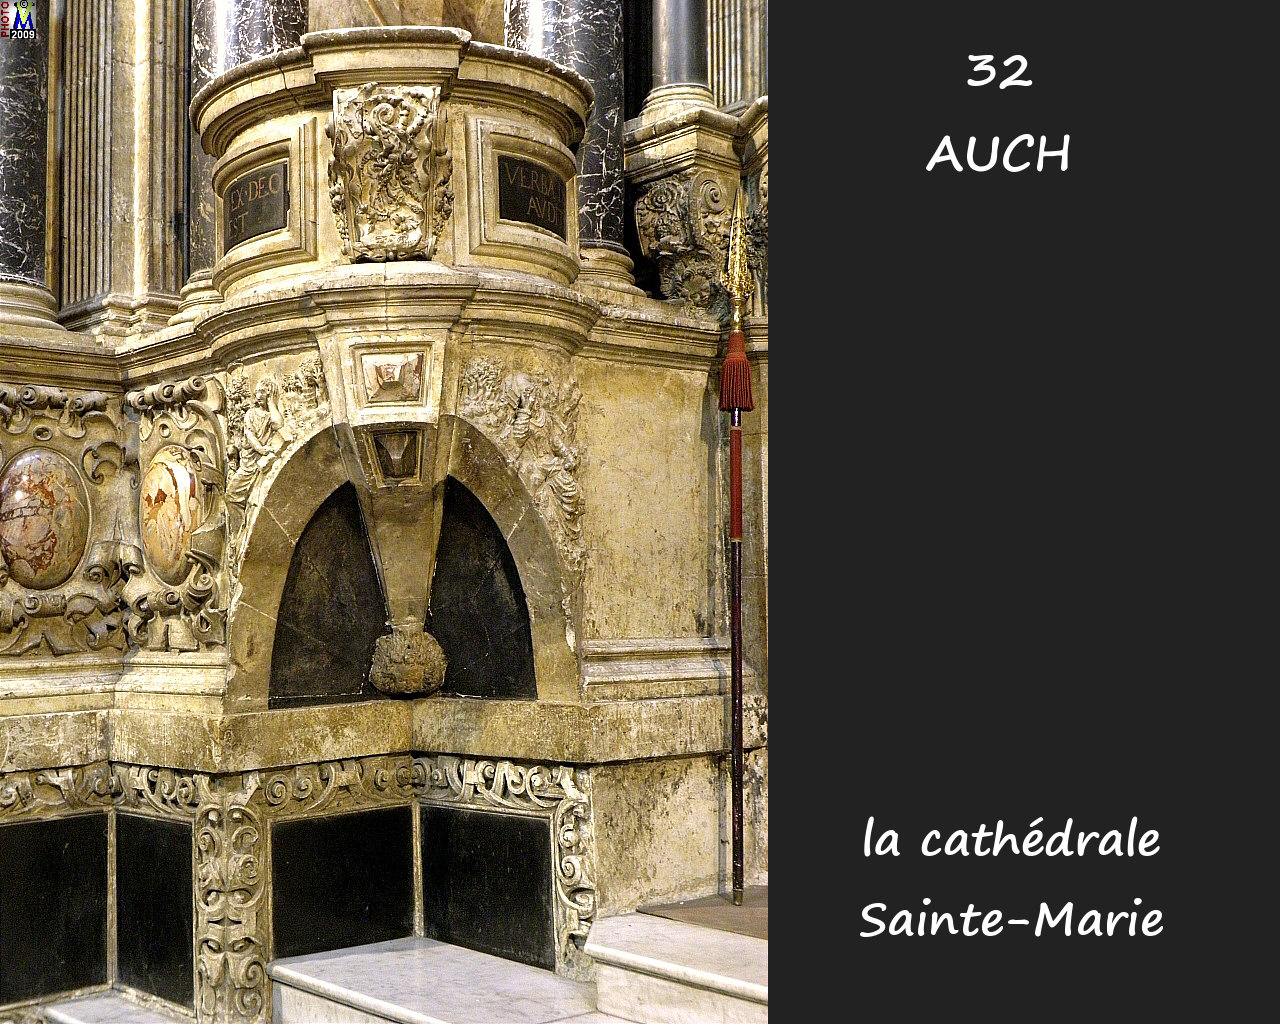 32AUCH_cathedrale_344.jpg